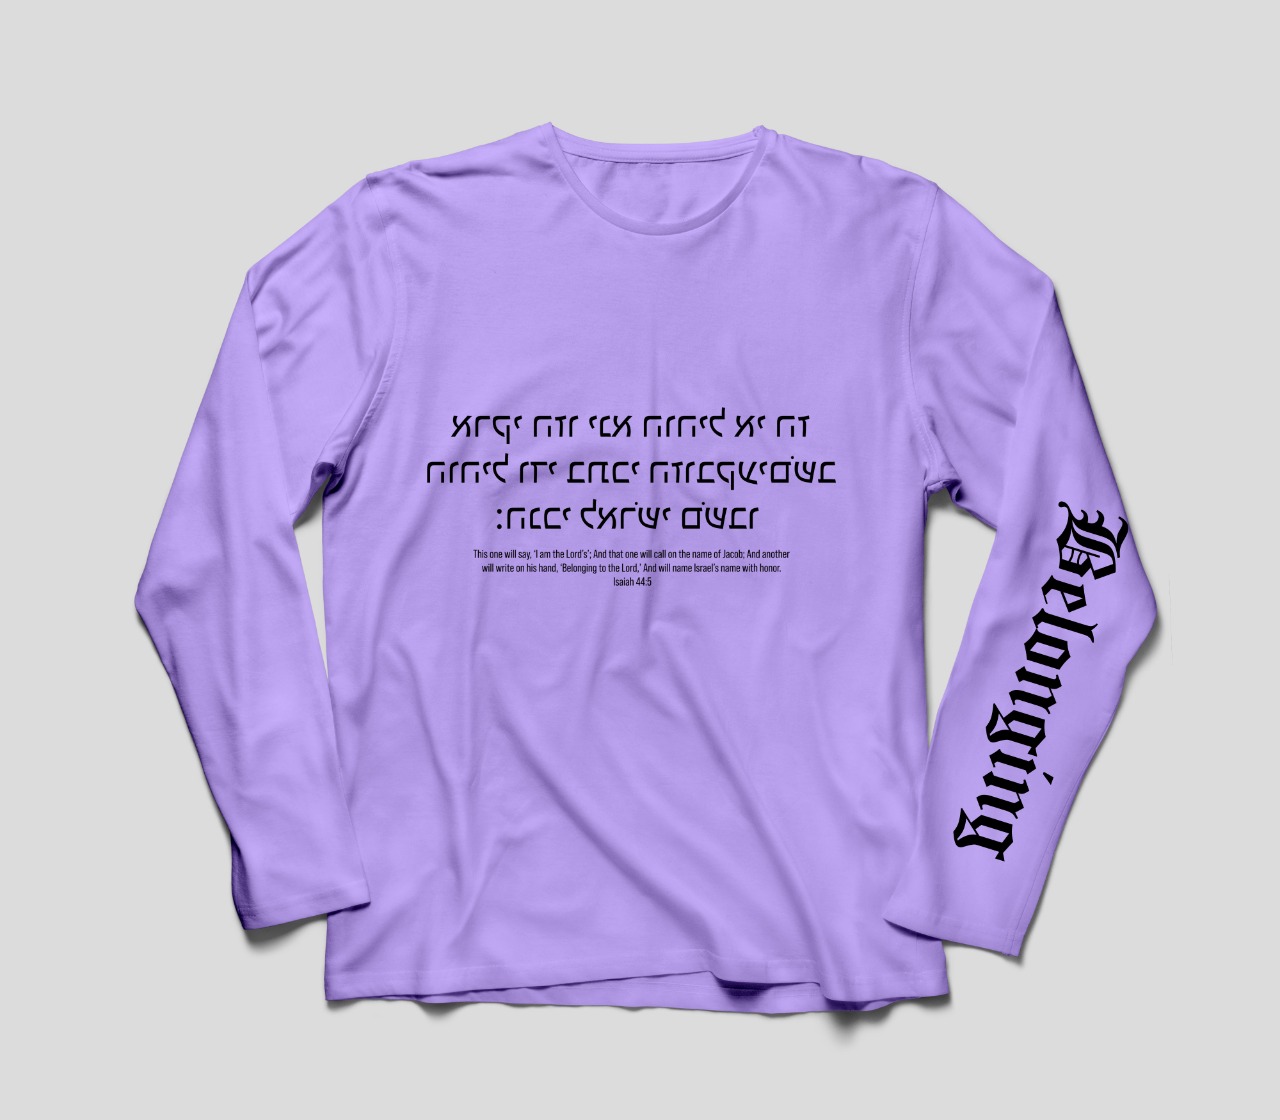 Long sleeve size and printing are customized